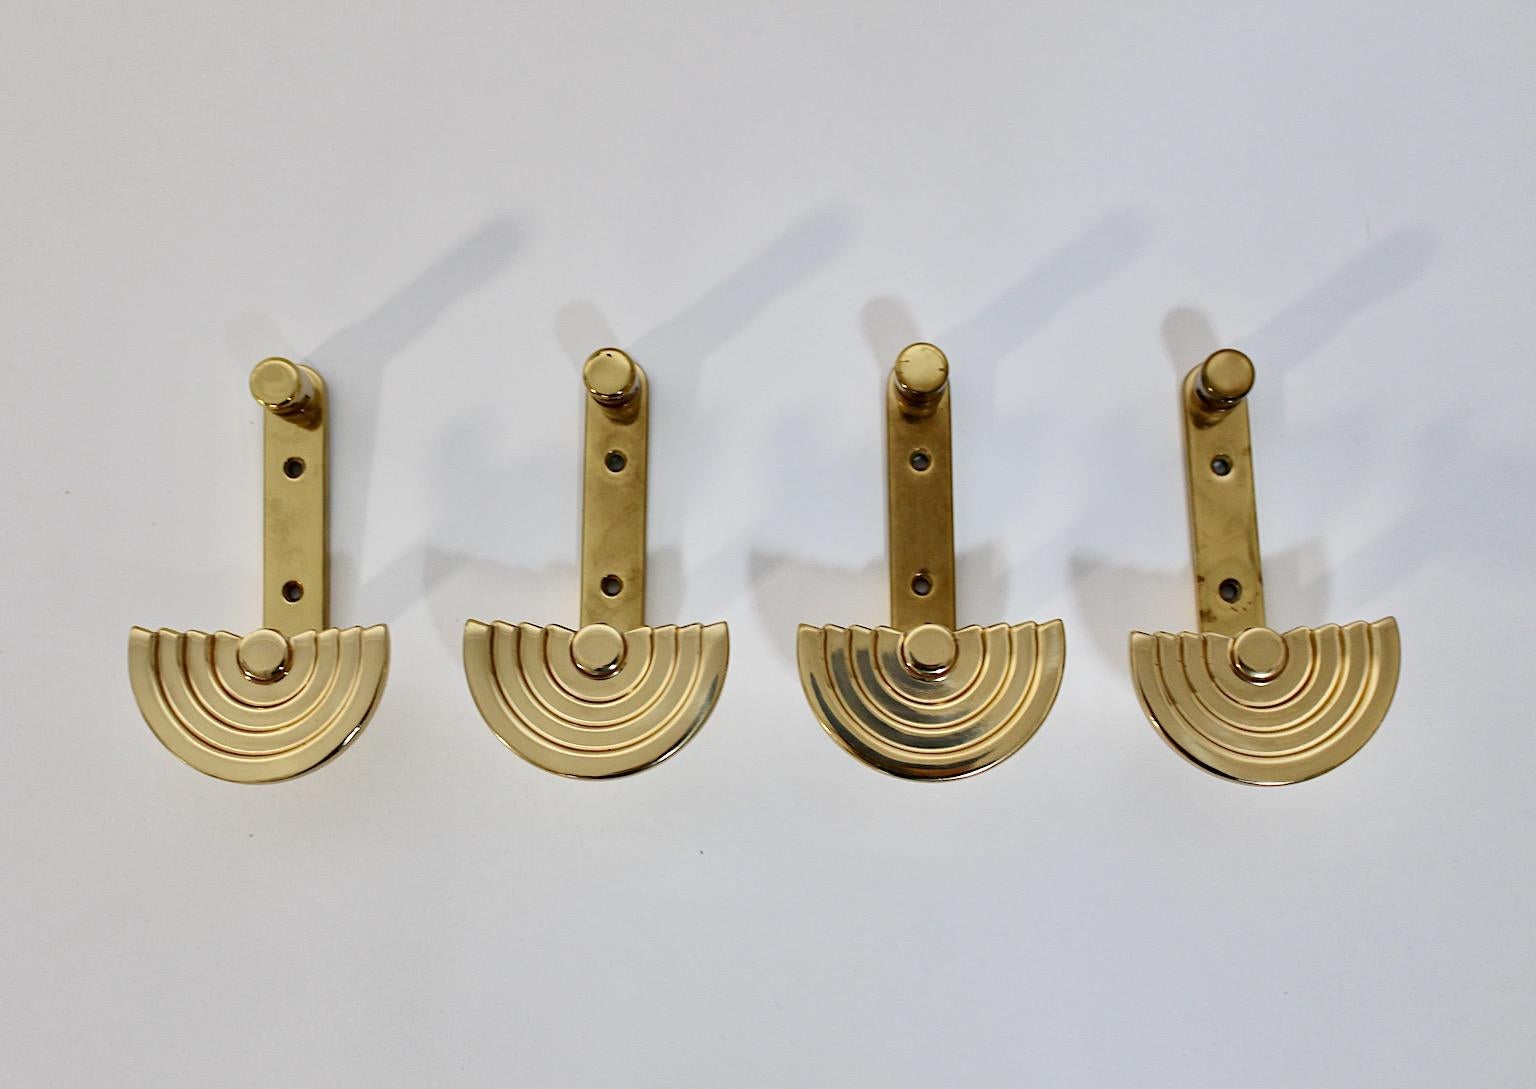 Italian Ettore Sottsass Vintage Brass Four Wall Hooks or Coat Hooks circa 1985 Italy For Sale